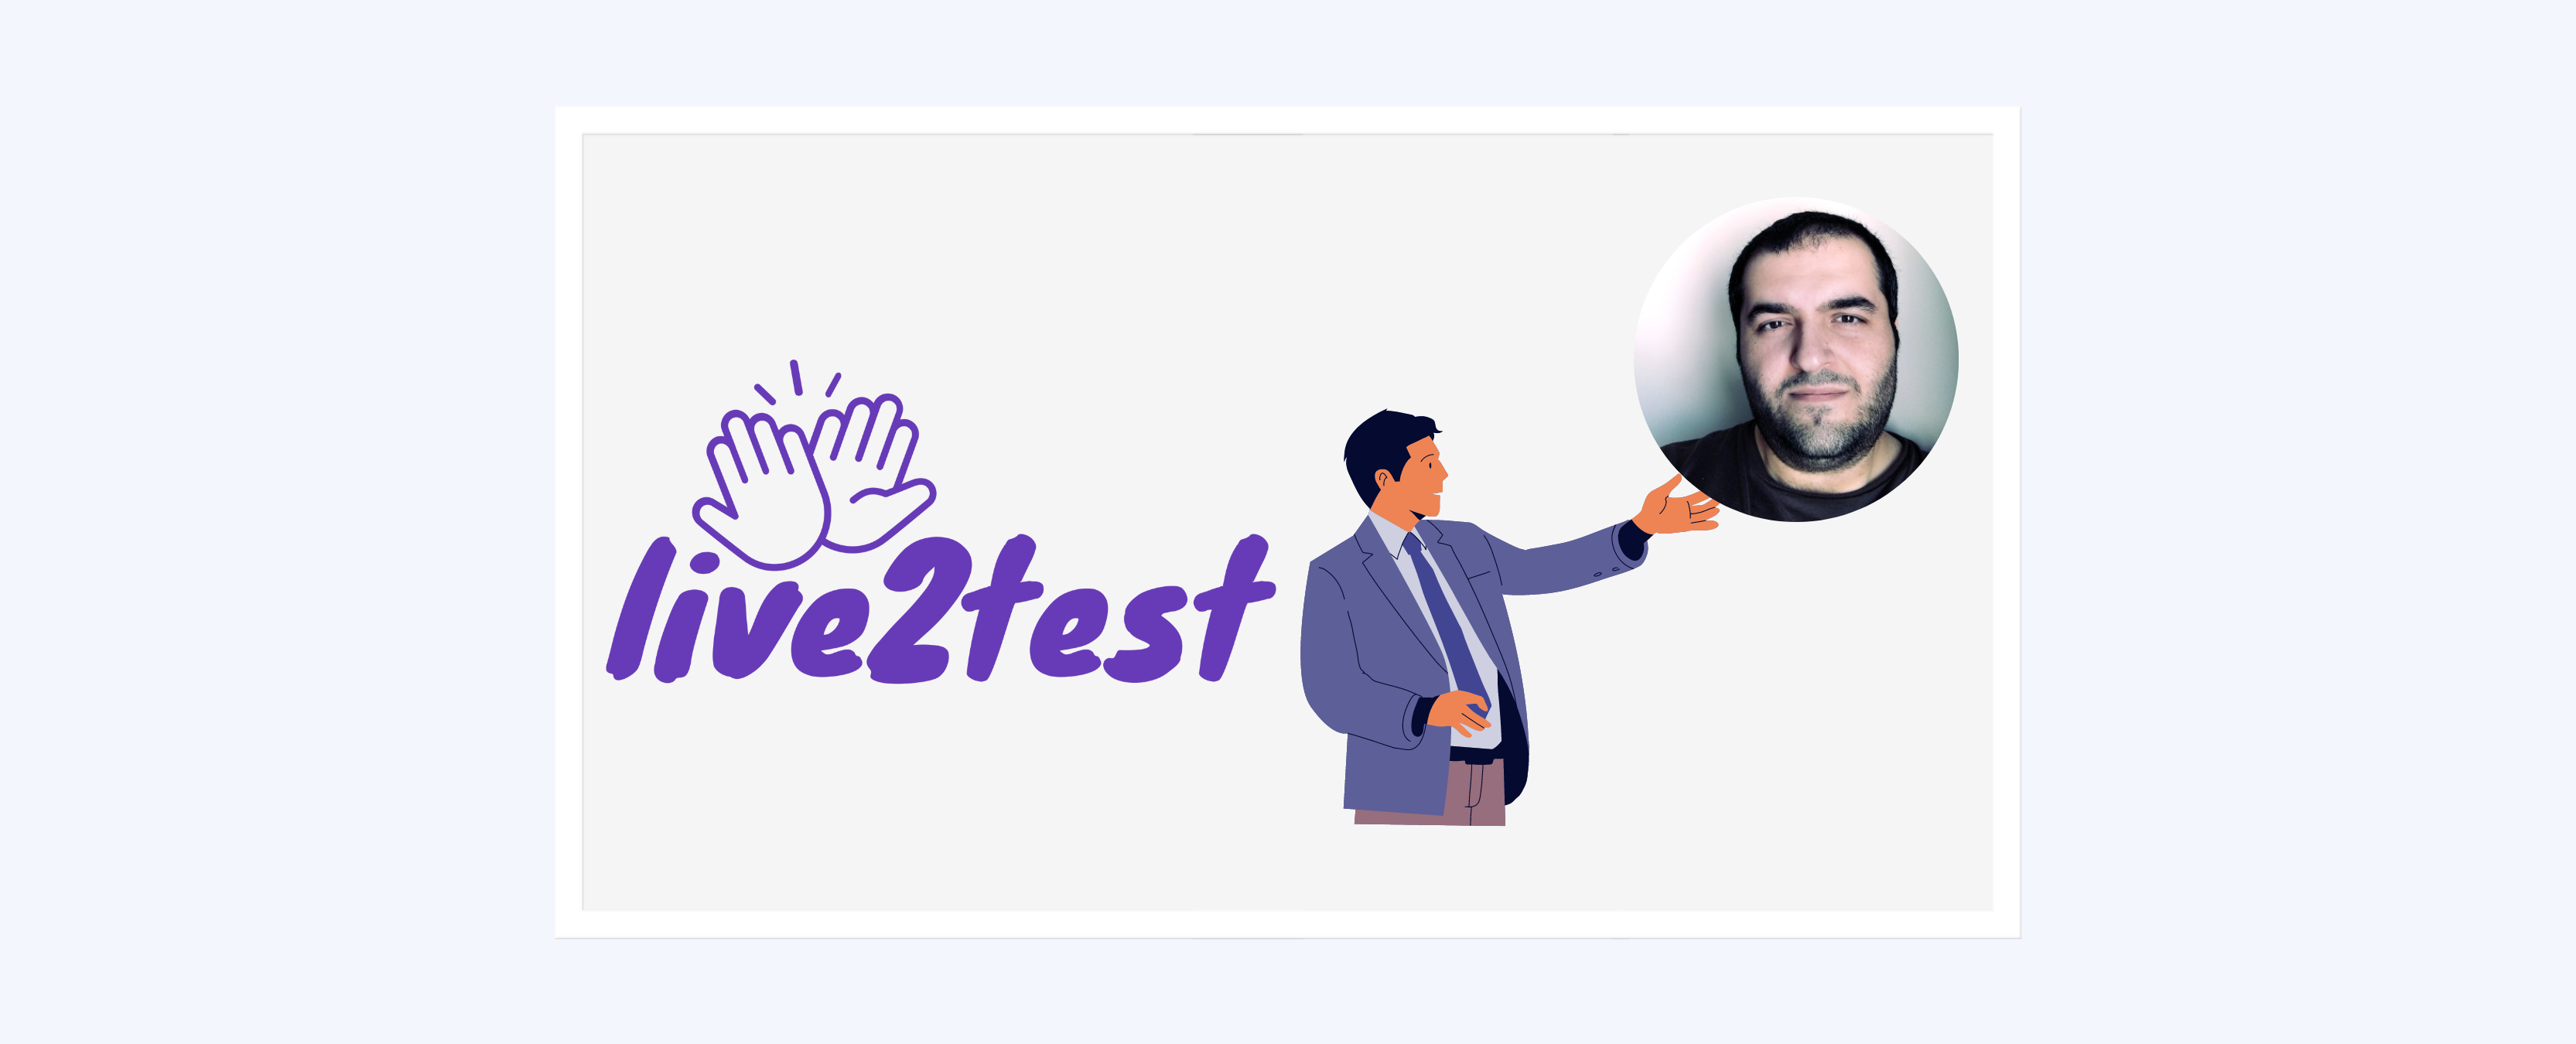 API Test Automation with 5 Best Practices by Ozgur Kaya